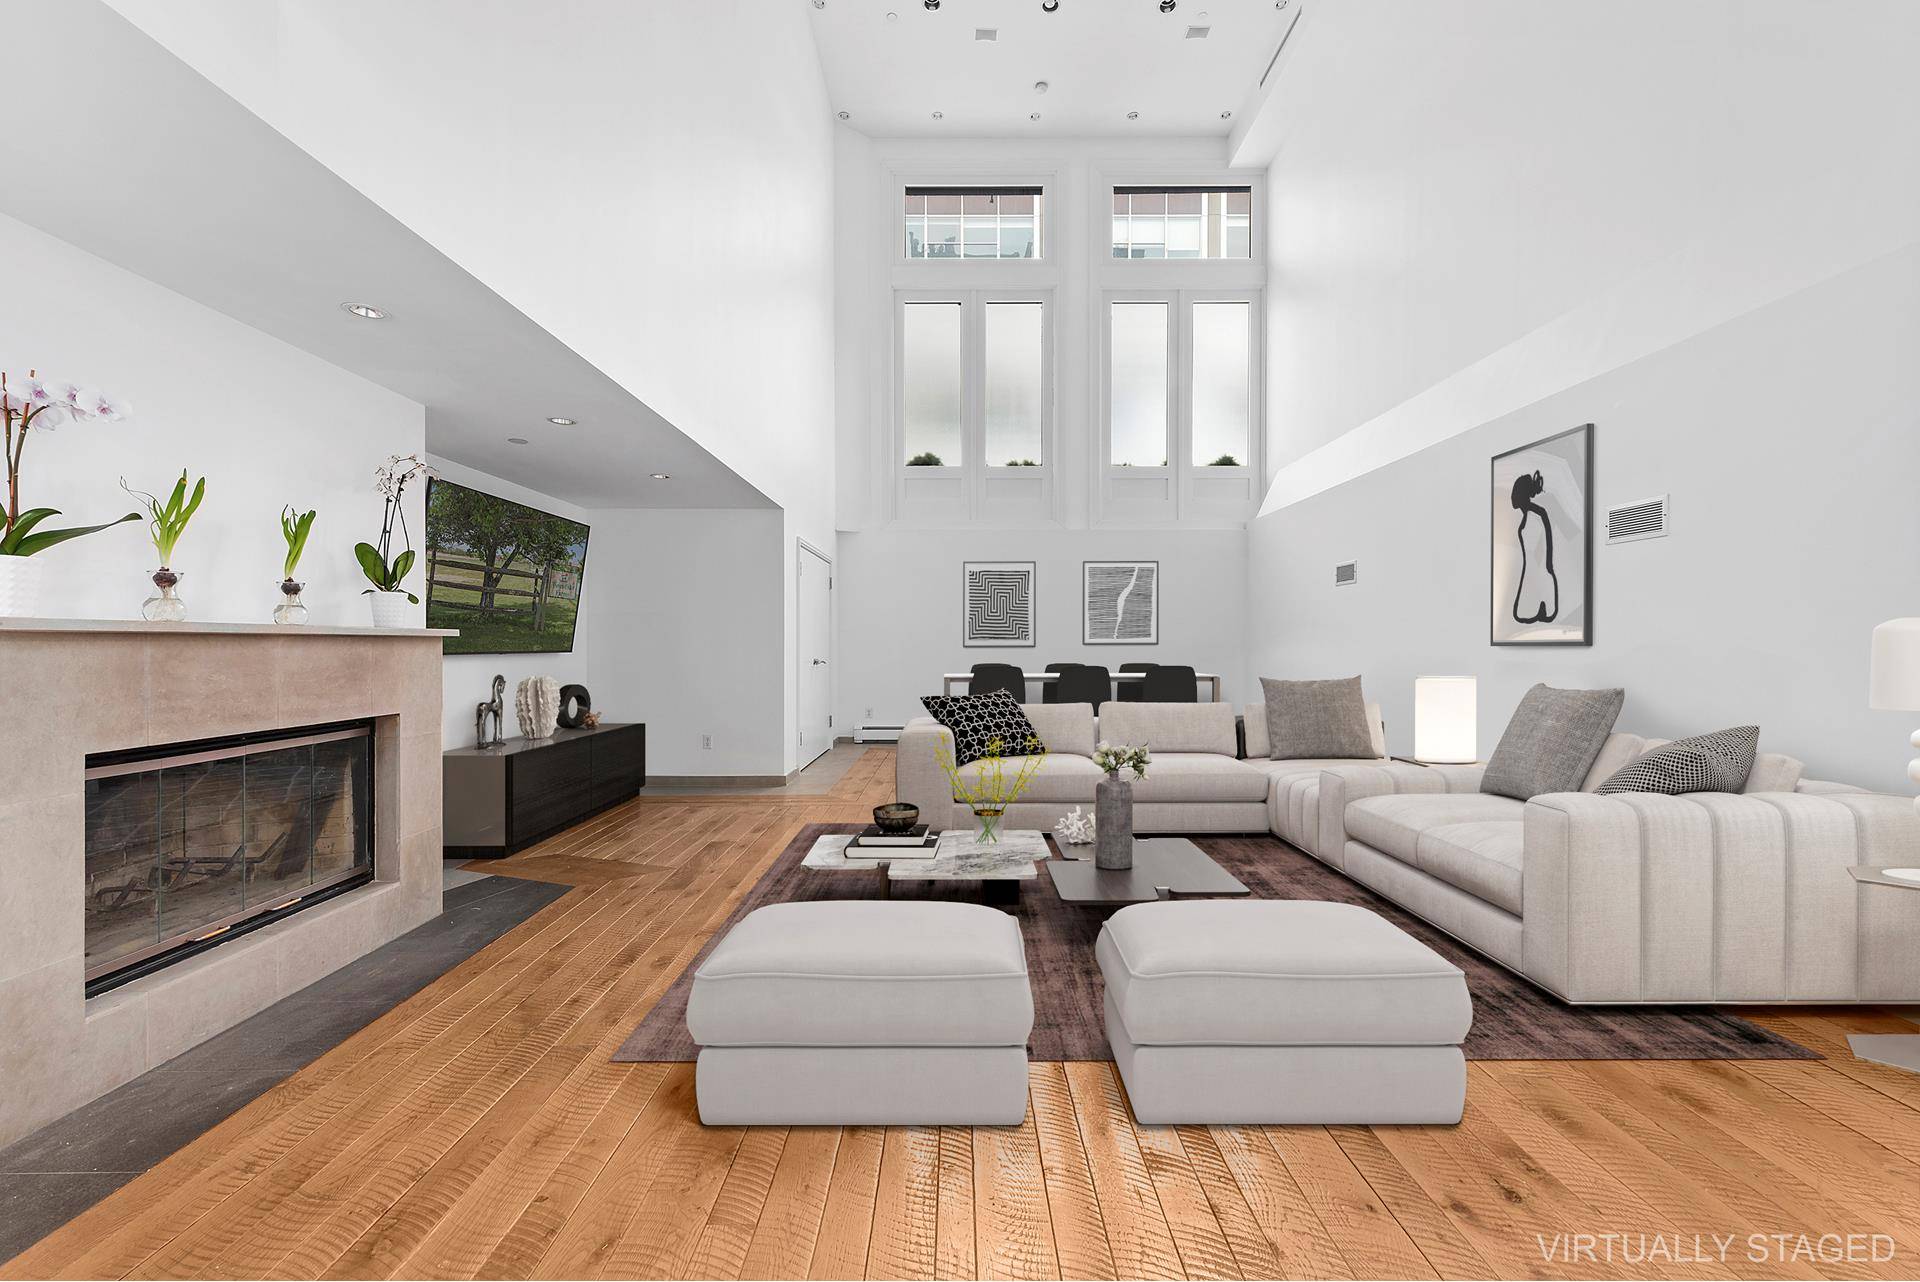 53 Murray Street, a 5, 355 square foot triplex, situated in the prestigious and historically rich TriBeCa.